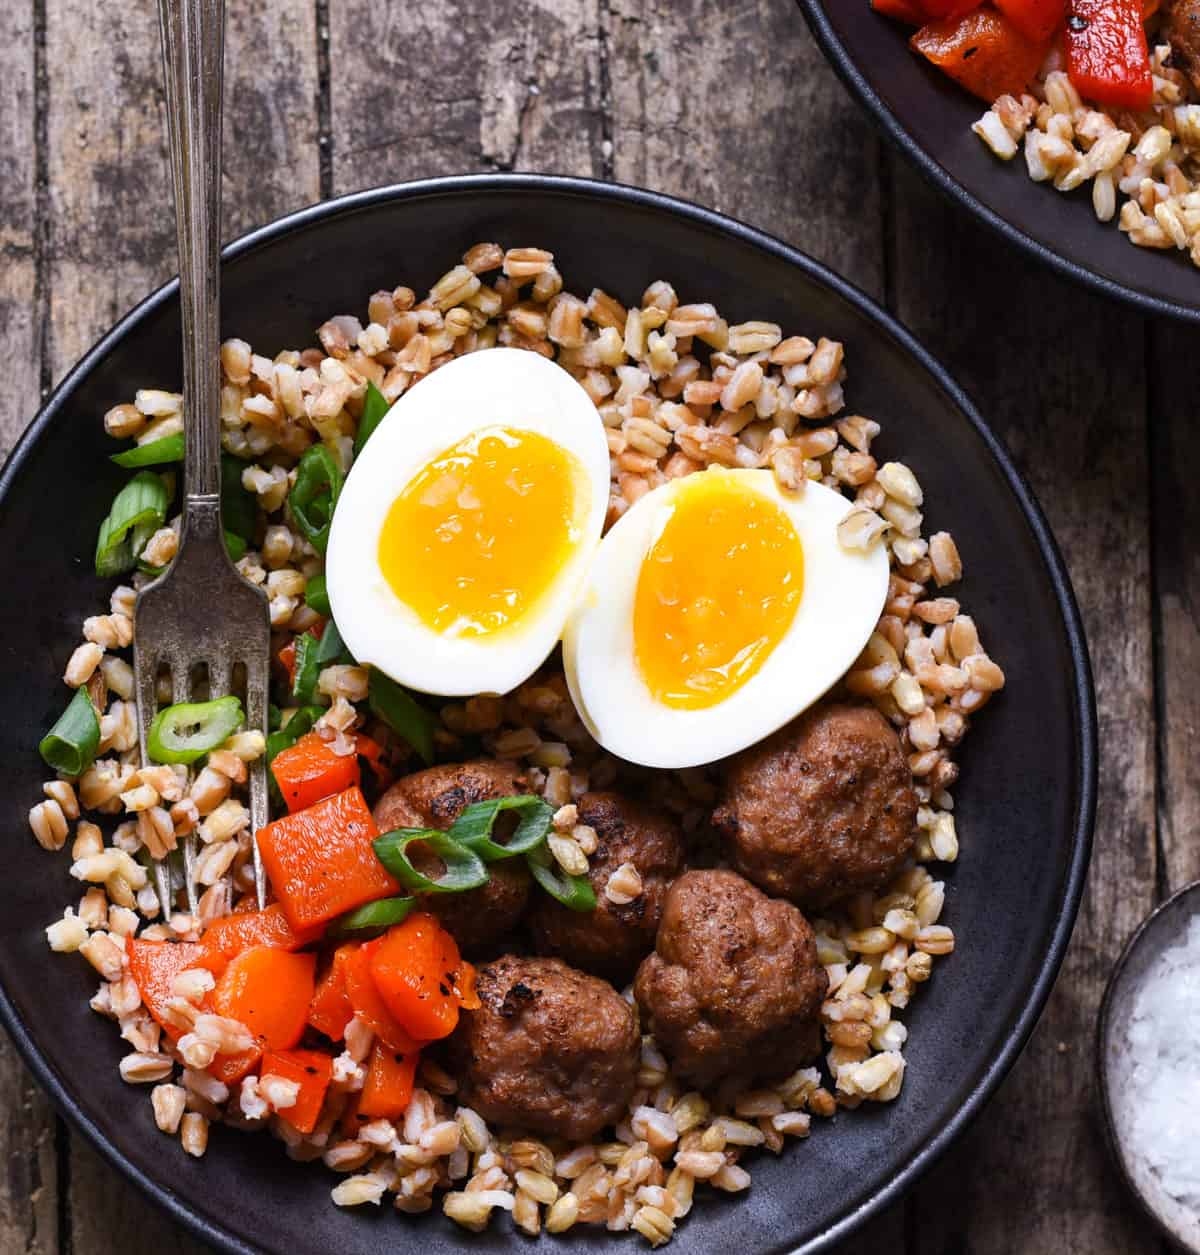 Make-Ahead Breakfast Grain Bowls with Turkey Sausage Meatballs - Prep each part of these breakfast bowls in advance, then quickly assemble on a busy morning! | foxeslovelemons.com